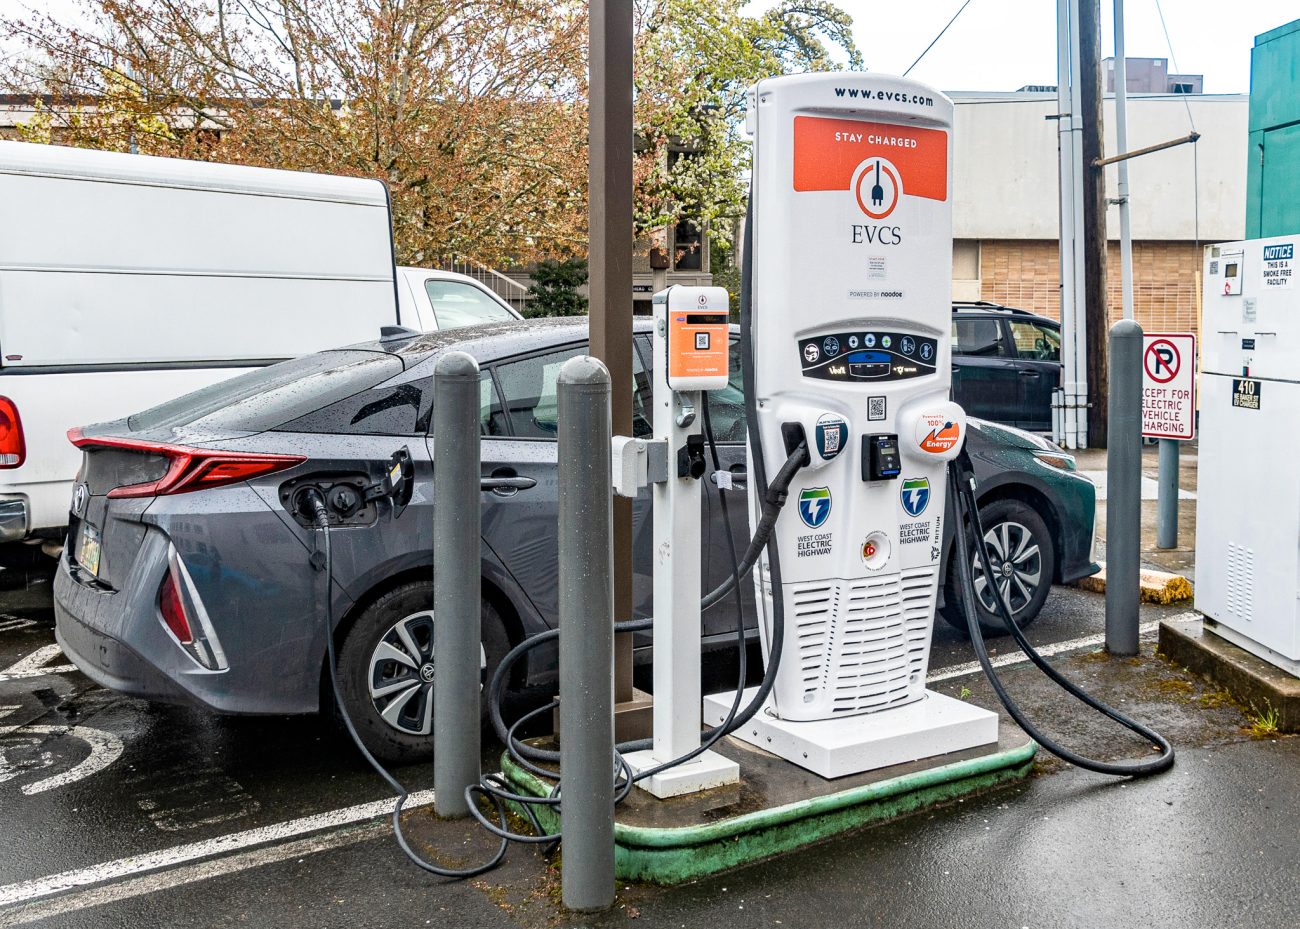 evcs-seeks-20-million-in-funding-to-expand-electric-vehicle-charging-network